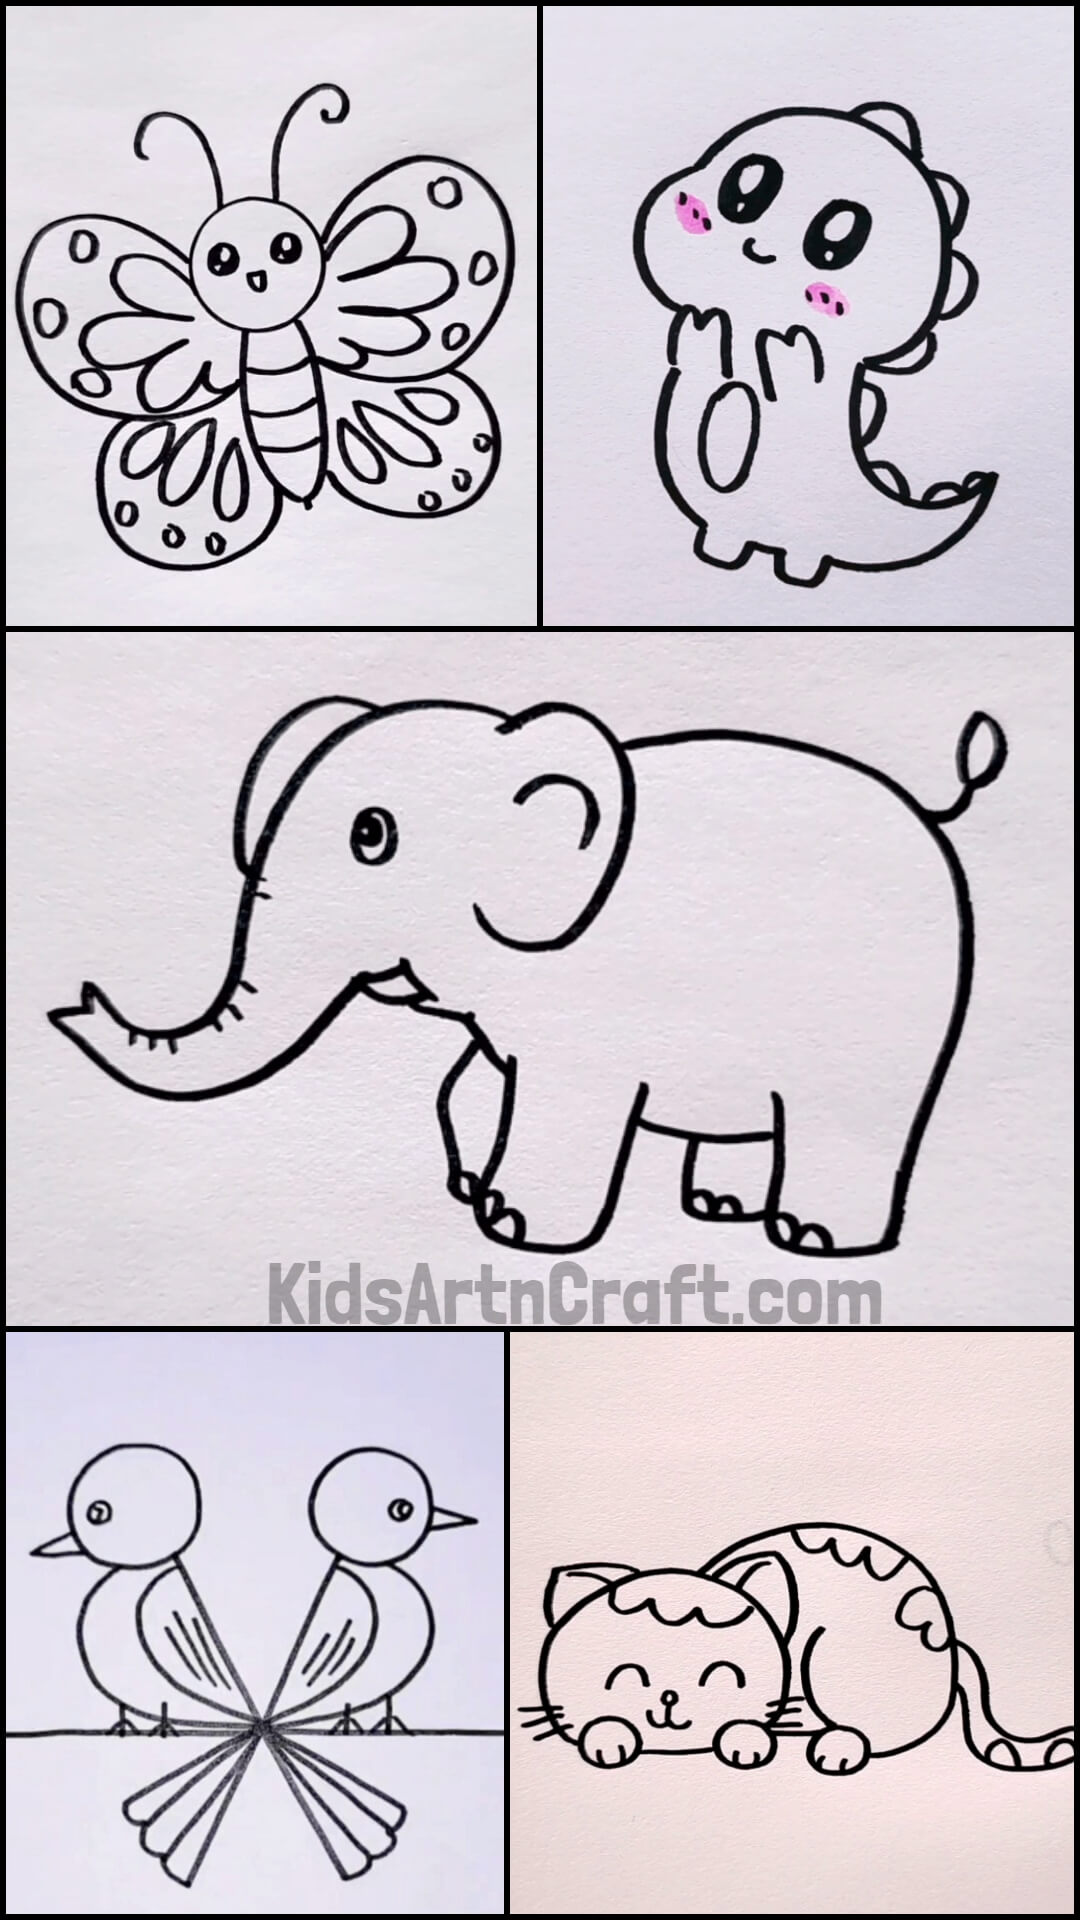 Easy Animal Drawing Ideas for Kids